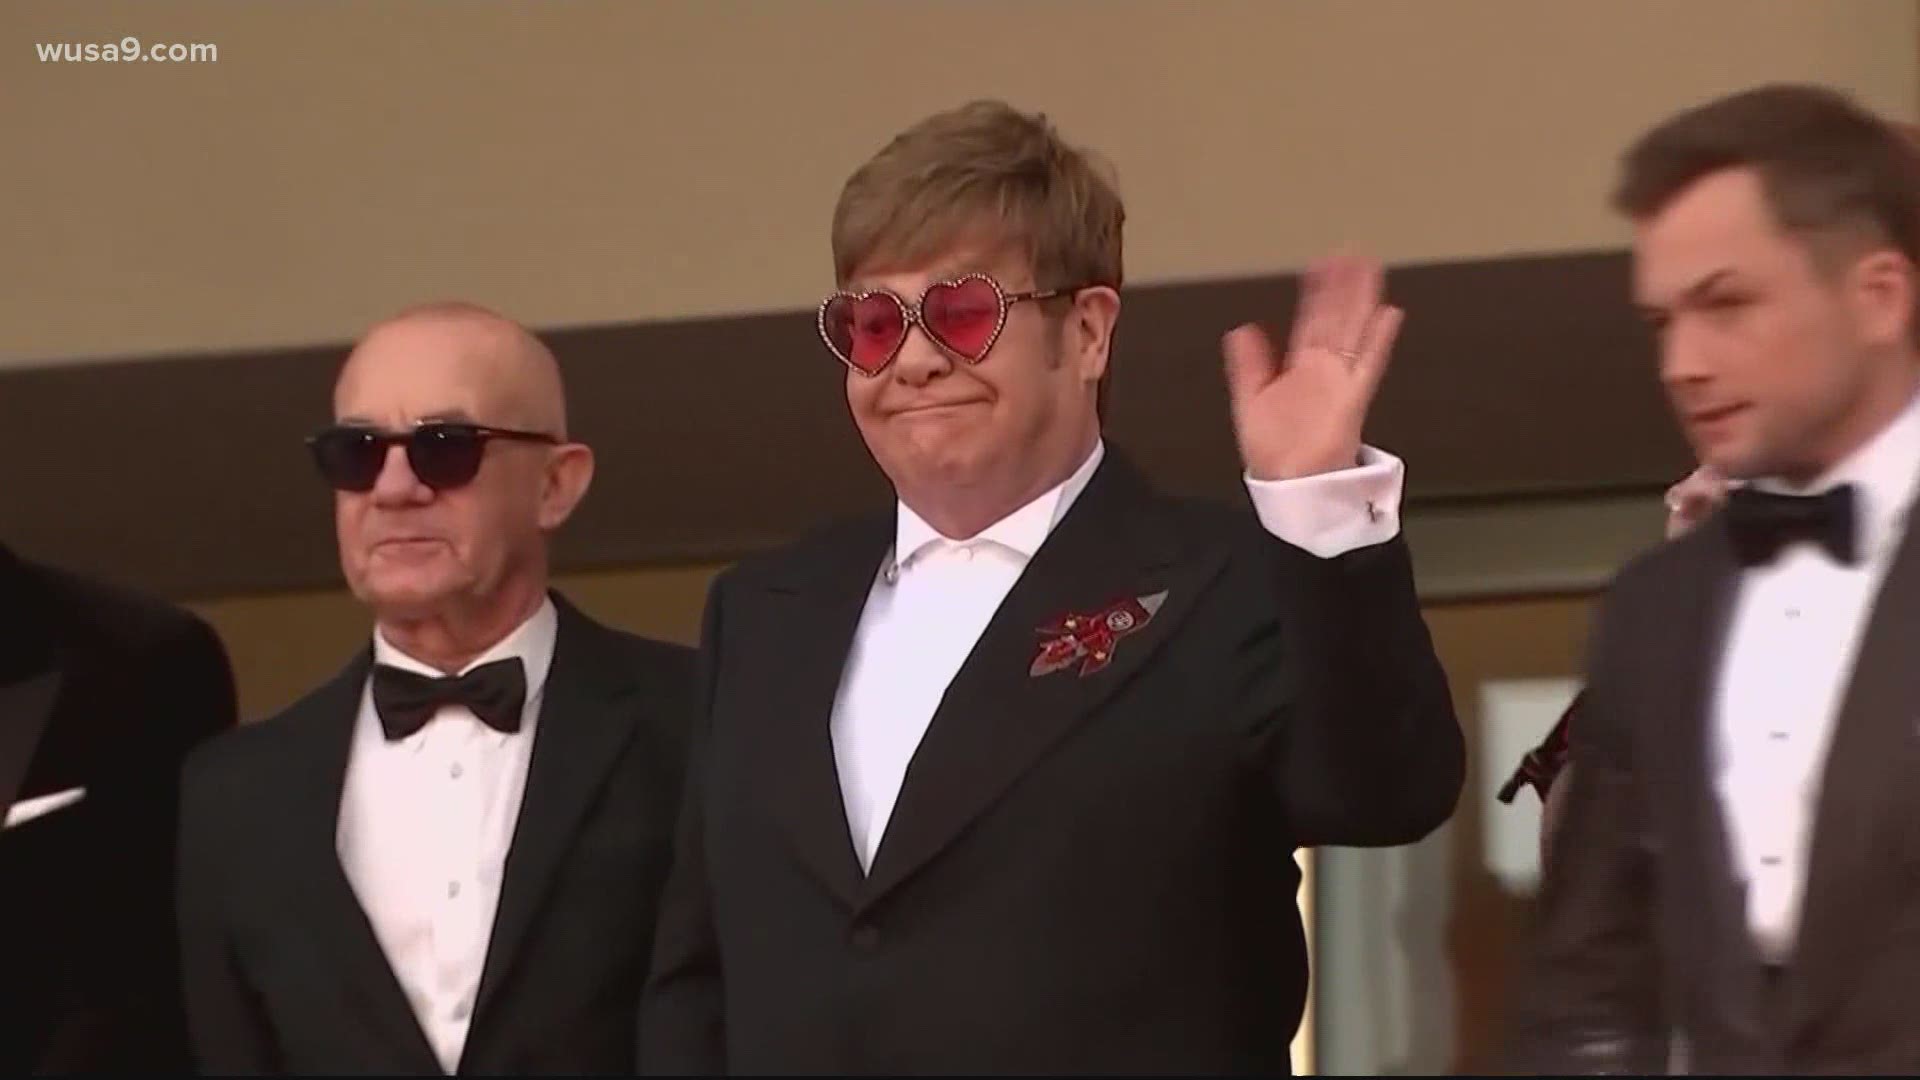 Elton John's farewell tour was put on pause because of the pandemic.